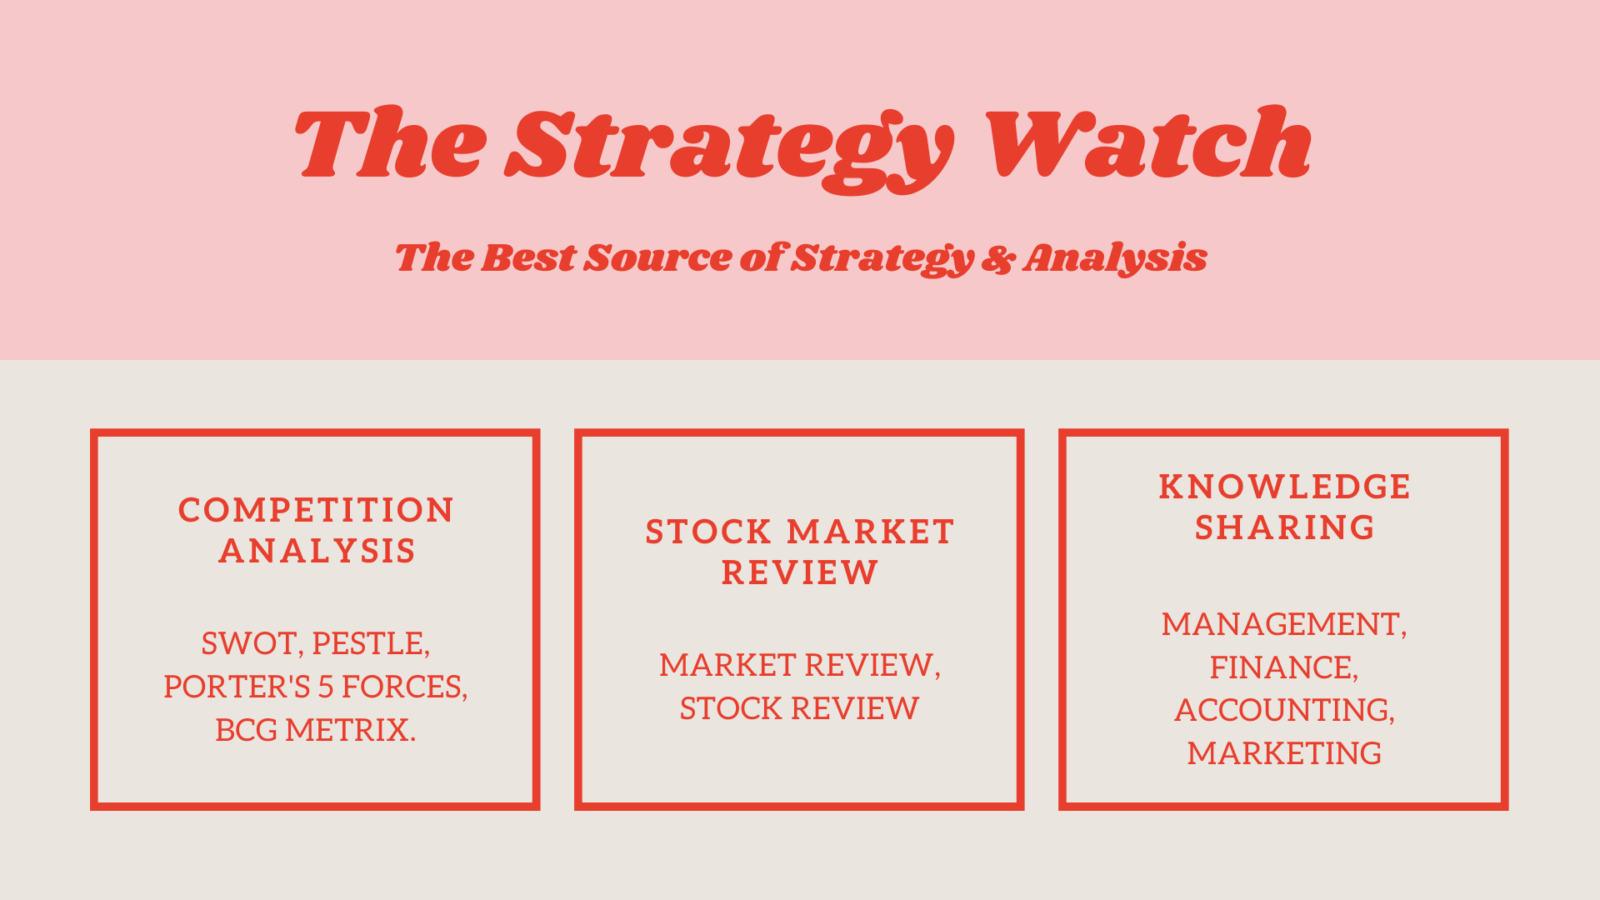 Market Price Analysis with Watch: for Brands in e-commerce